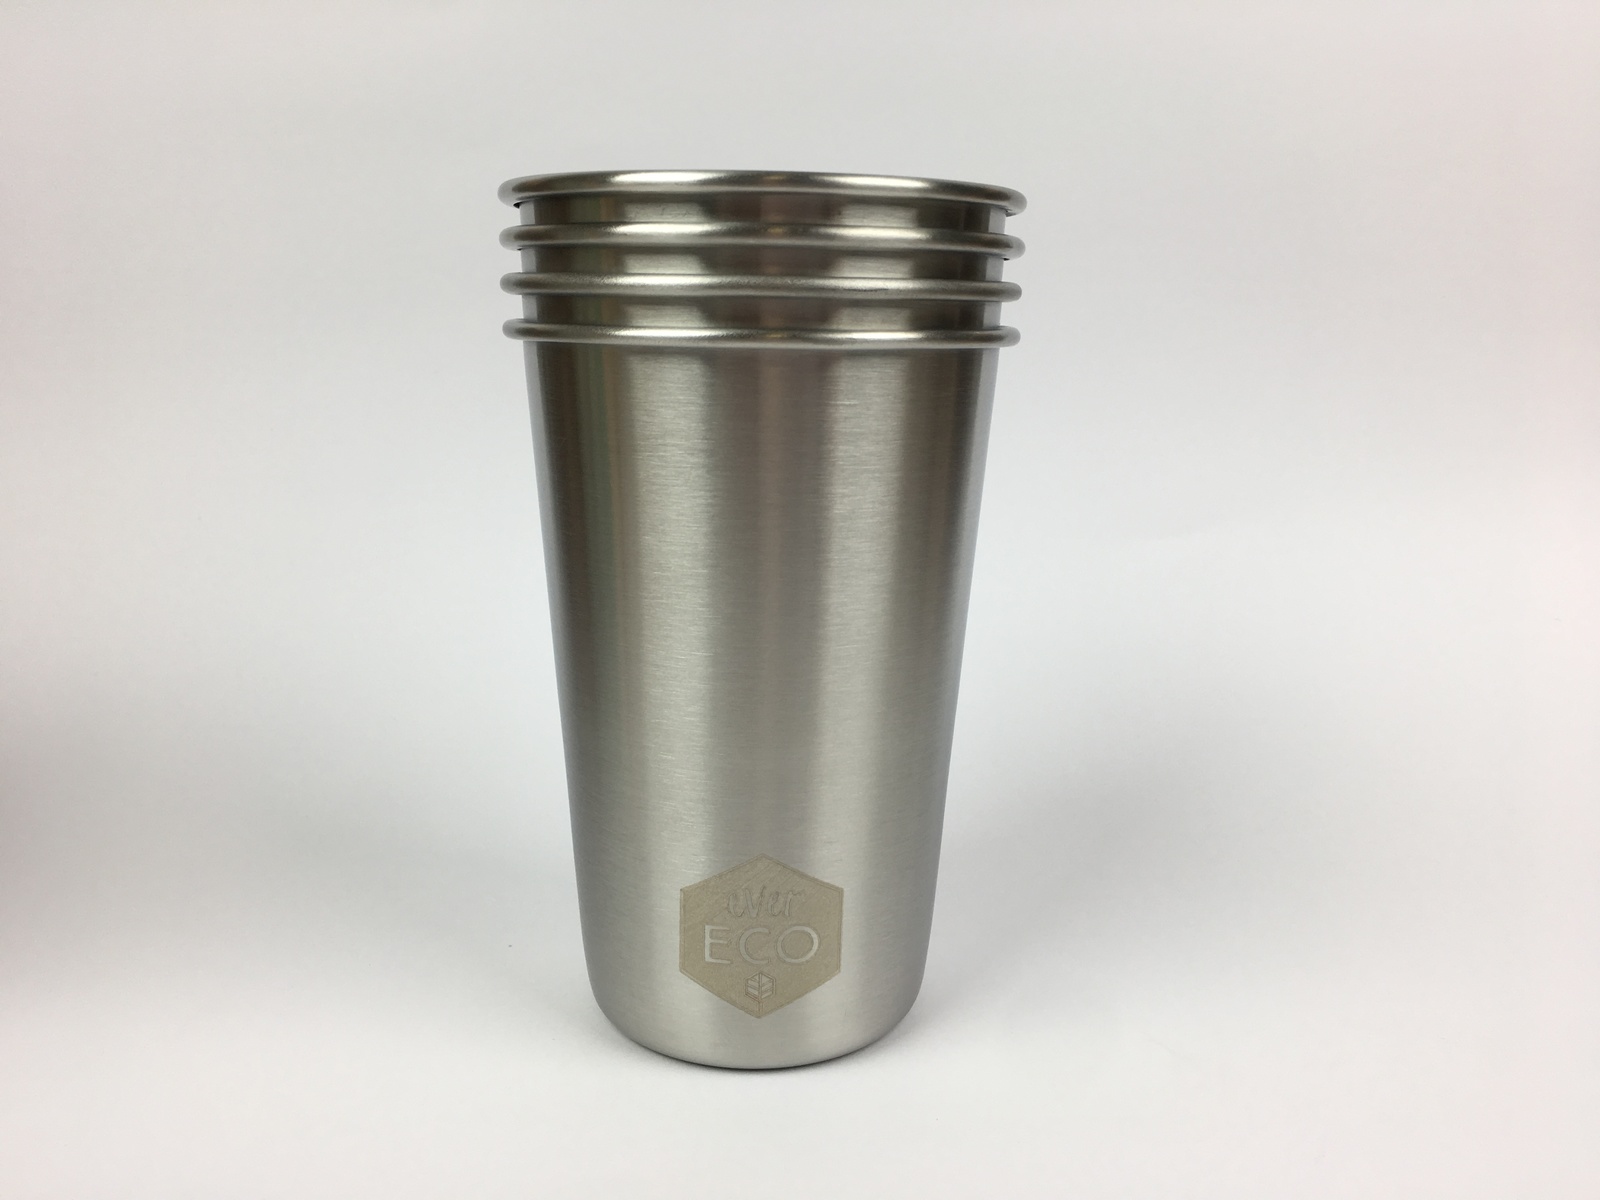 Ever Eco Reusable Stainless Steel Cups I Eco Cups I Sassy Organics